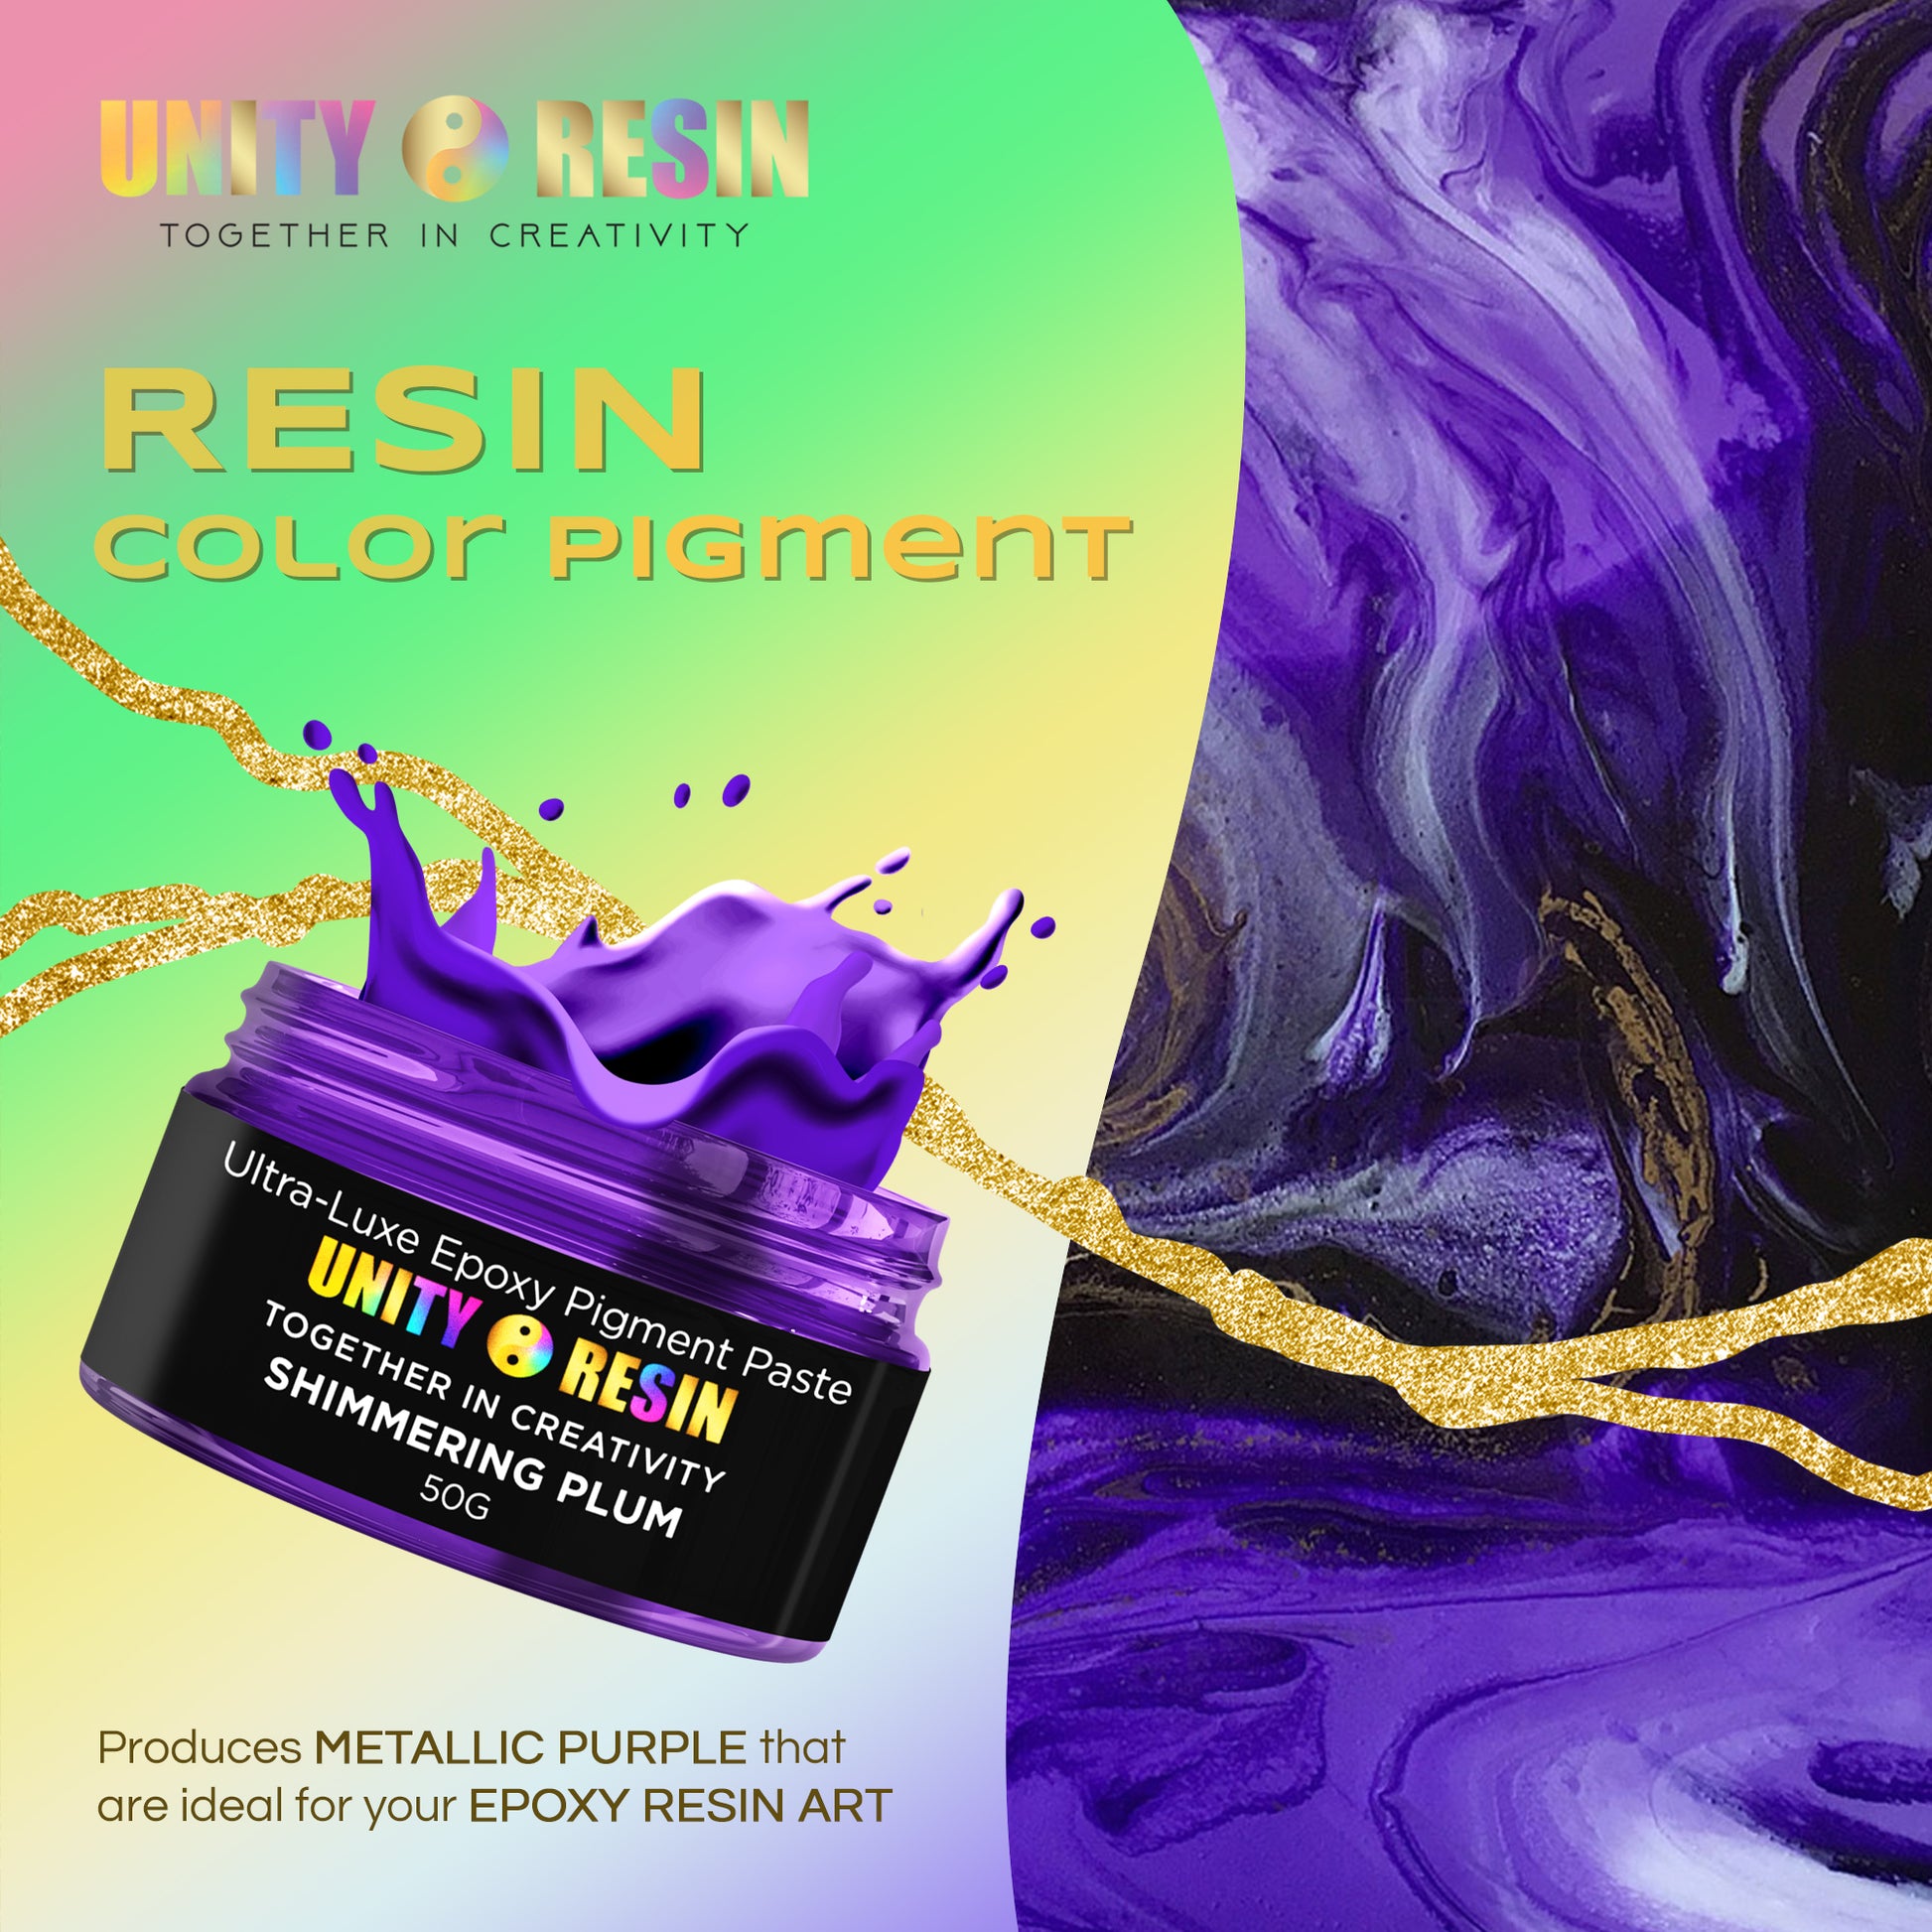 Resin Pigment Paste,epoxydye Pigment,higher Concentrated & Easy To Mix  White Epoxy Pigment For Resin